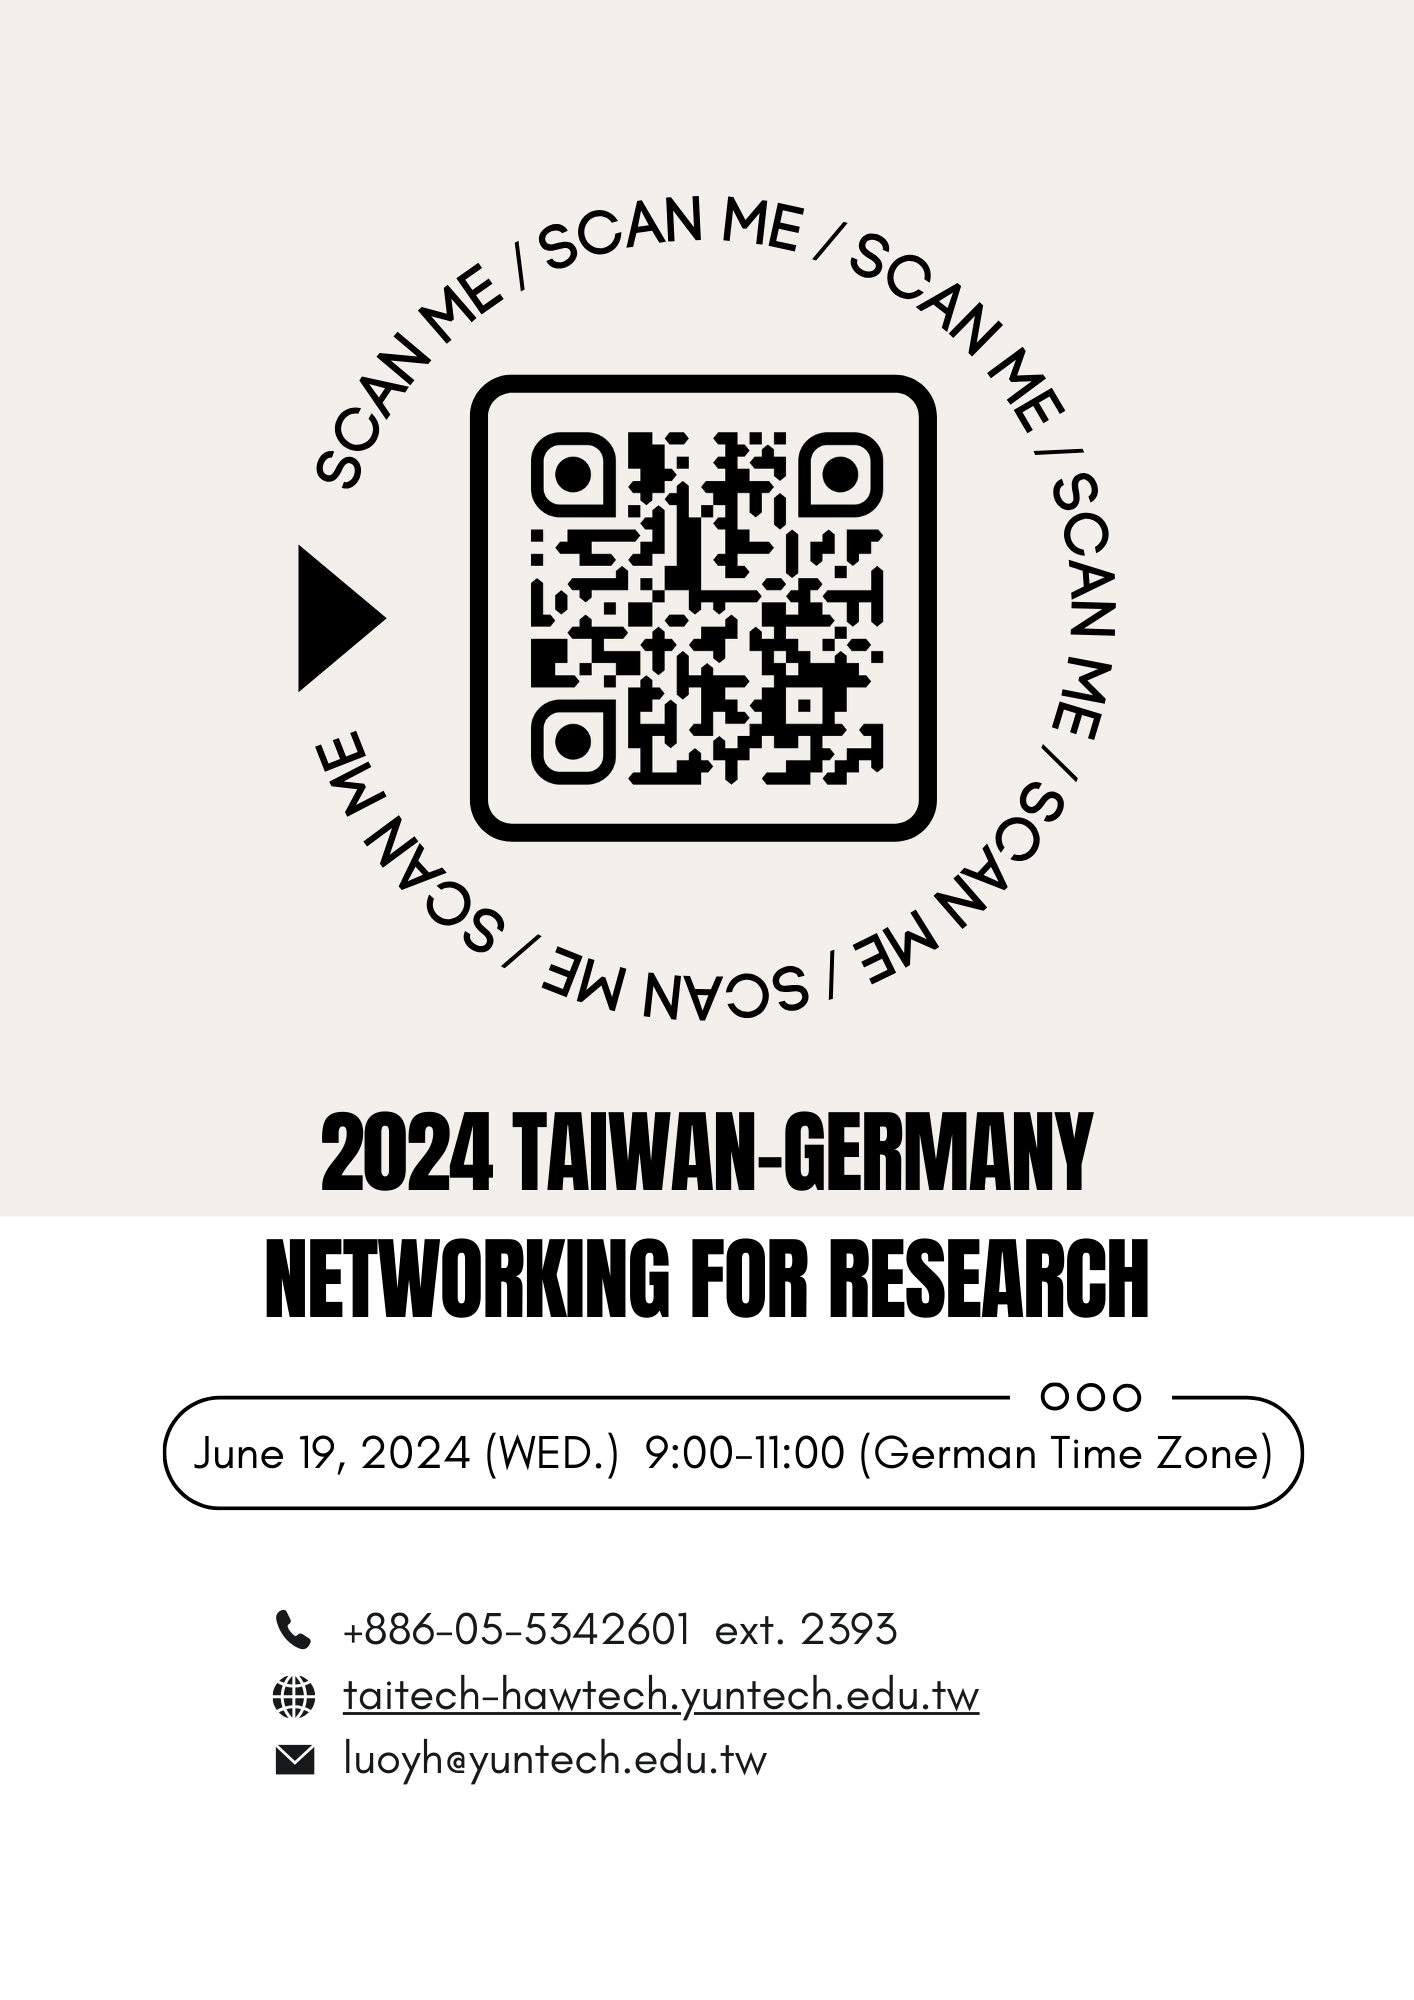 2024 Taiwan-Germany Networking for Research